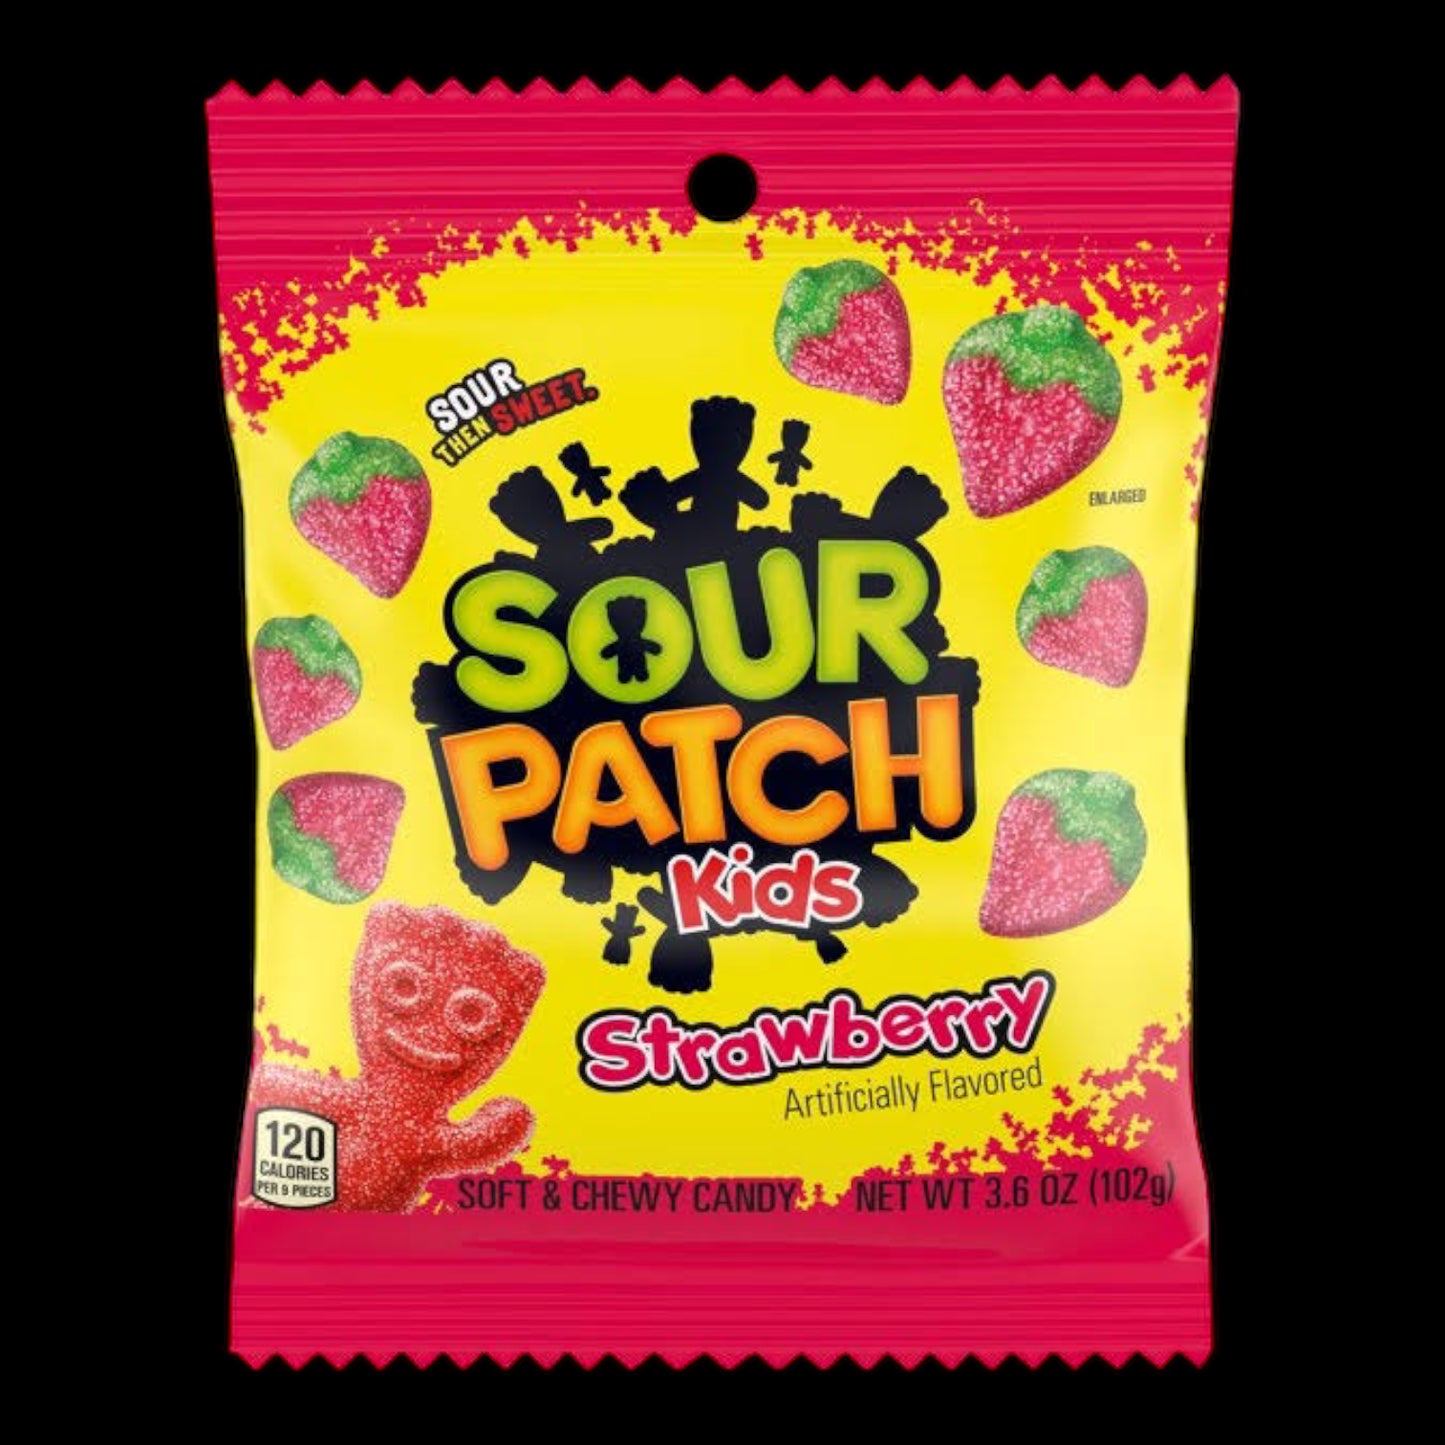 Sour Patch Strawberry 102g